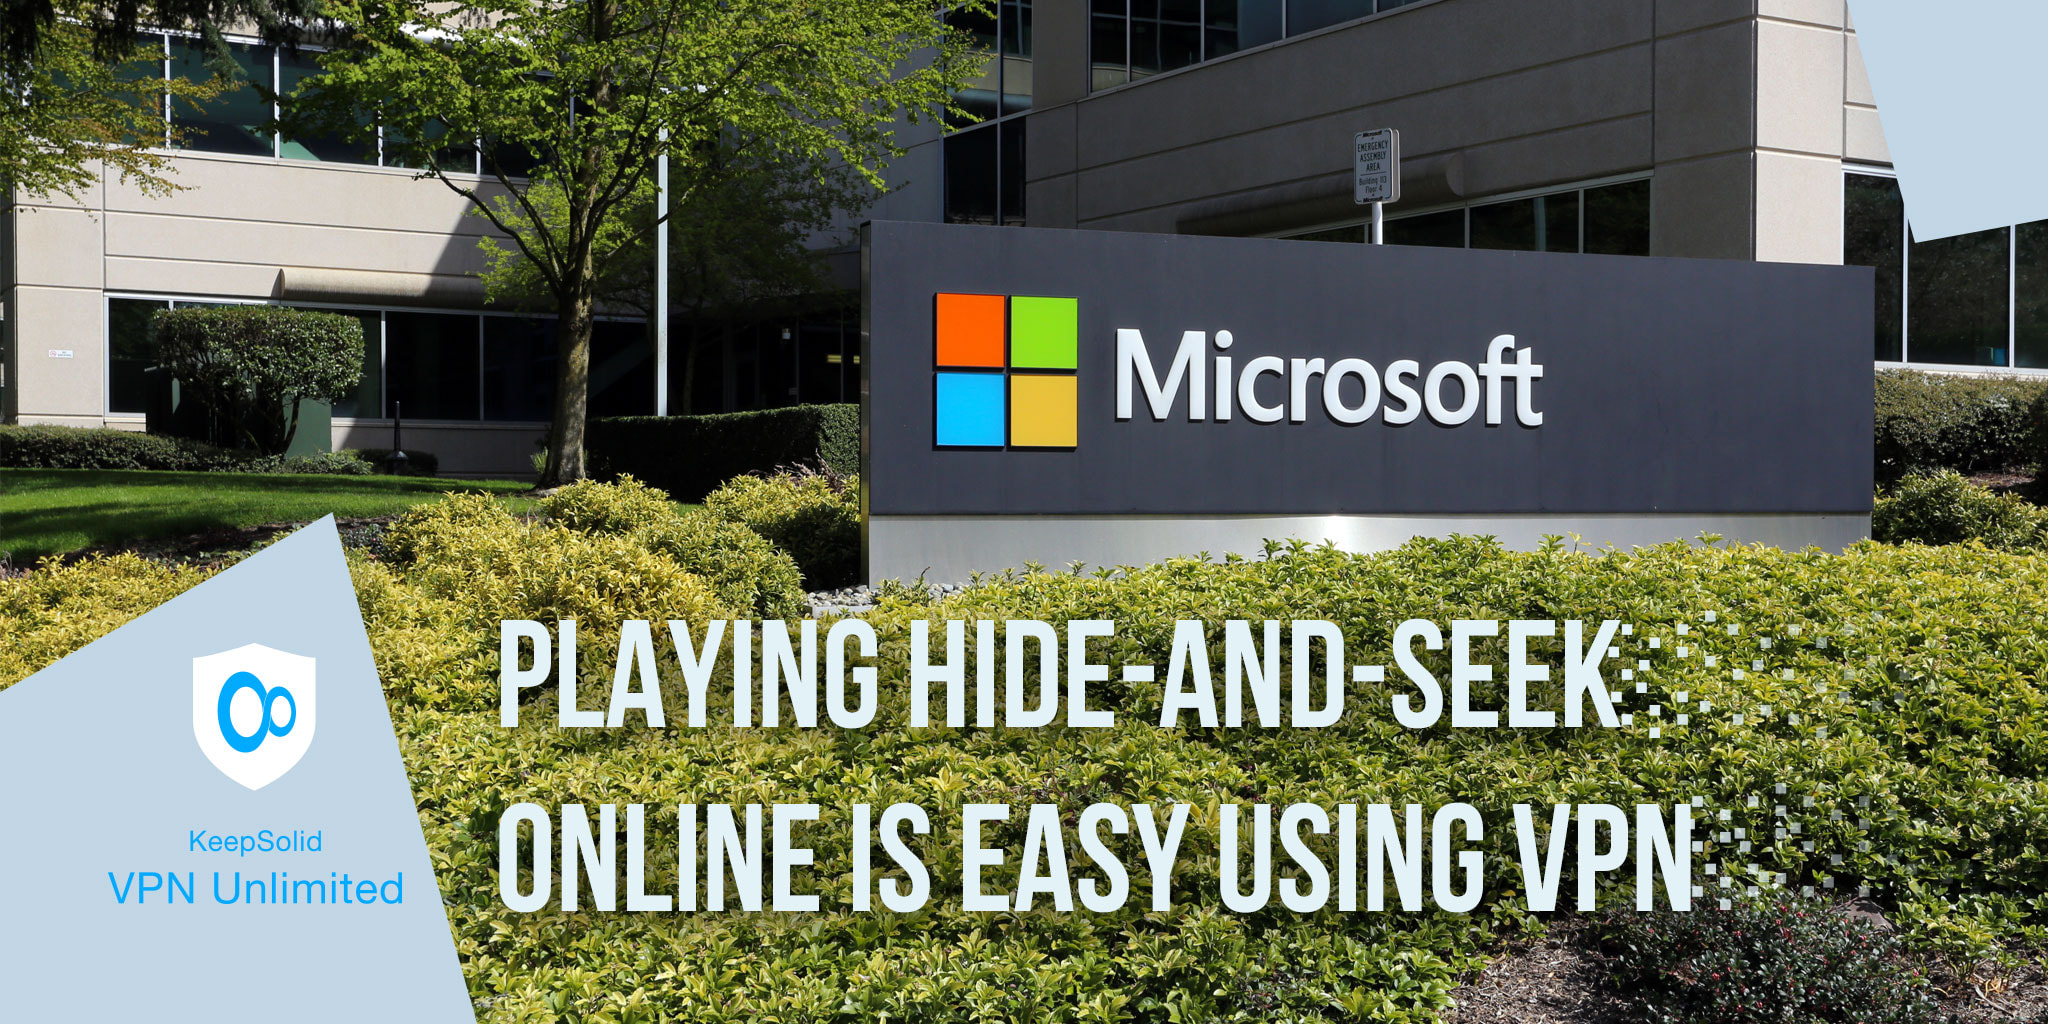 The Microsoft headquarters campus in Redmond in Redmond, Washington on April 15, 2017. Microsoft is one of the world’s largest software, hardware and video gaming companies. Hiding location with VPN concept